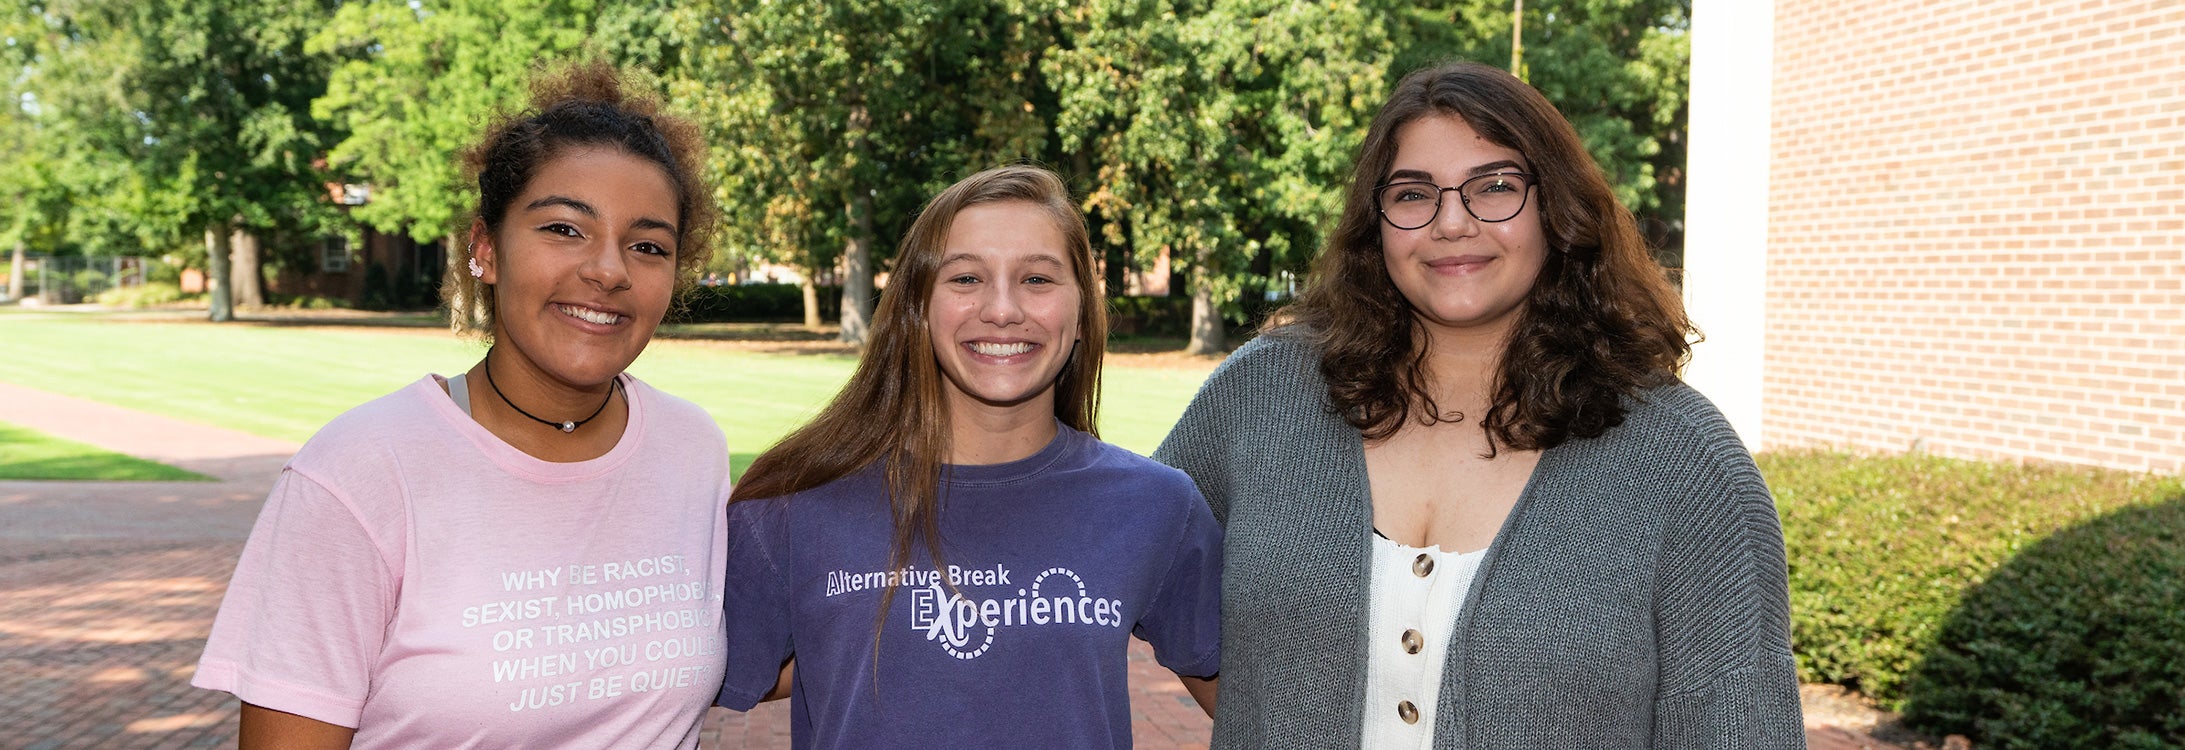 Makayla Harris (left), Madison Weeks and Erin Mackey are the current Gordon Darragh scholarship recipients. Their four-year scholarship covers tuition, fees, room and board, and emphasizes leadership development. (Photos by Cliff Hollis)